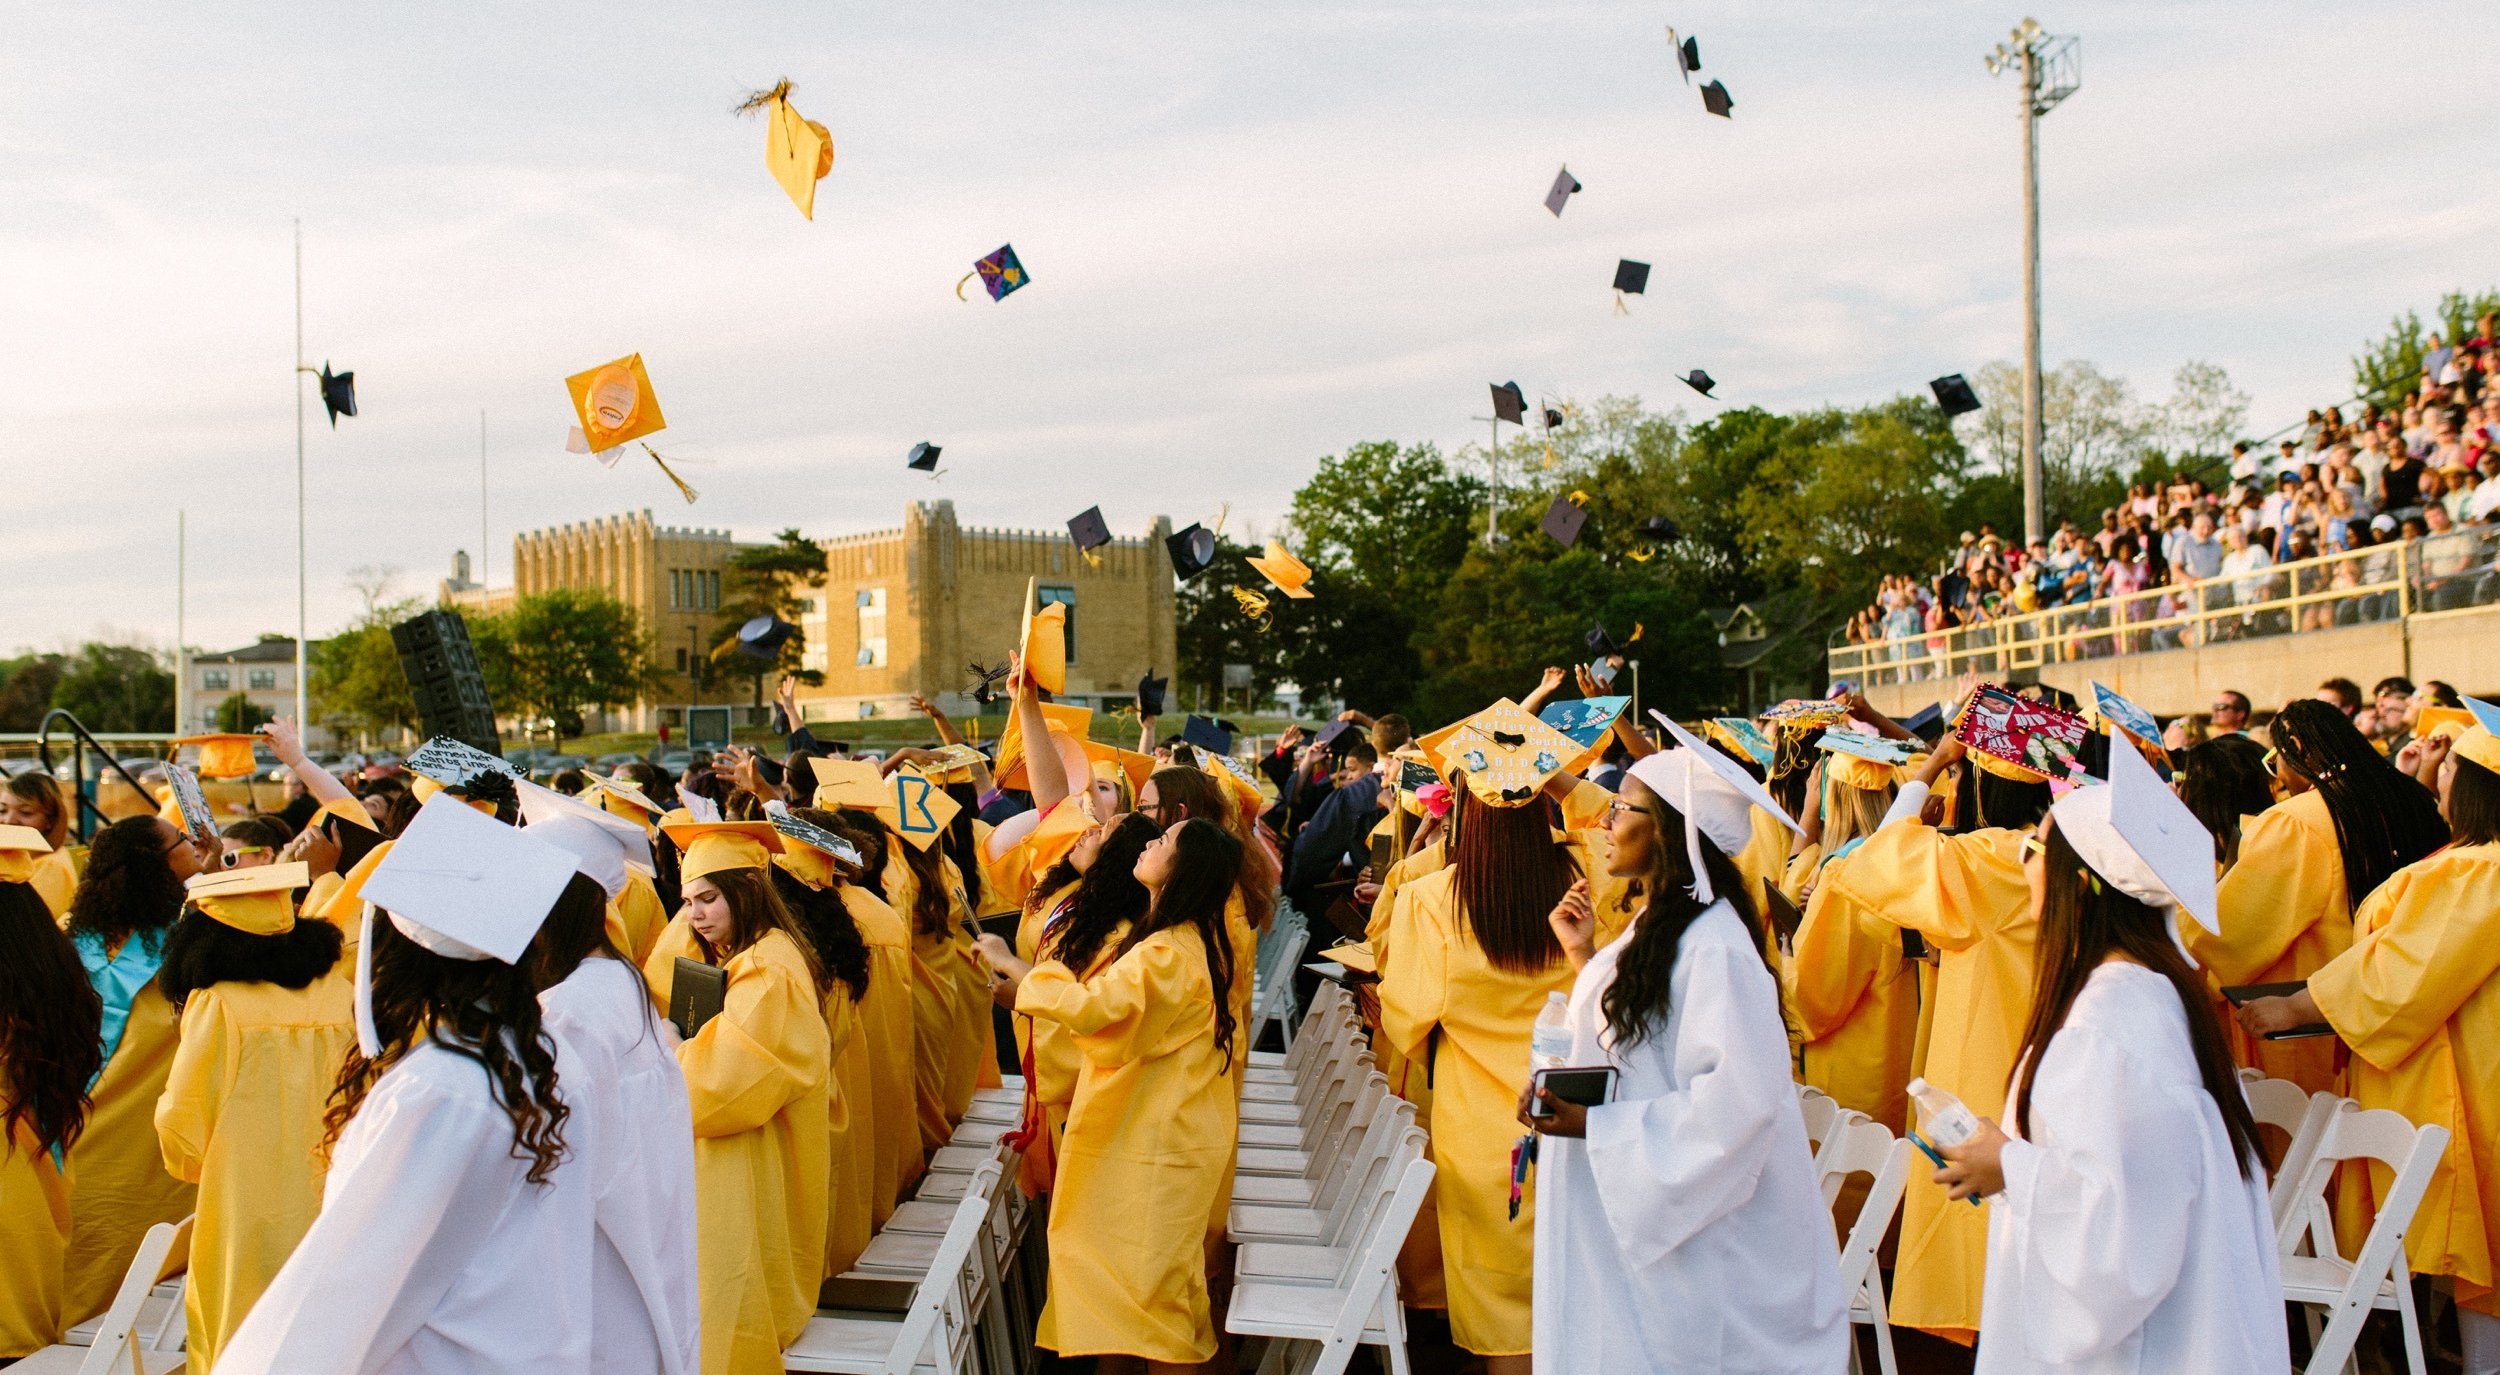 Graduation ceremony with students in yellow and white cap and gown, throwing caps into the air in celebration.